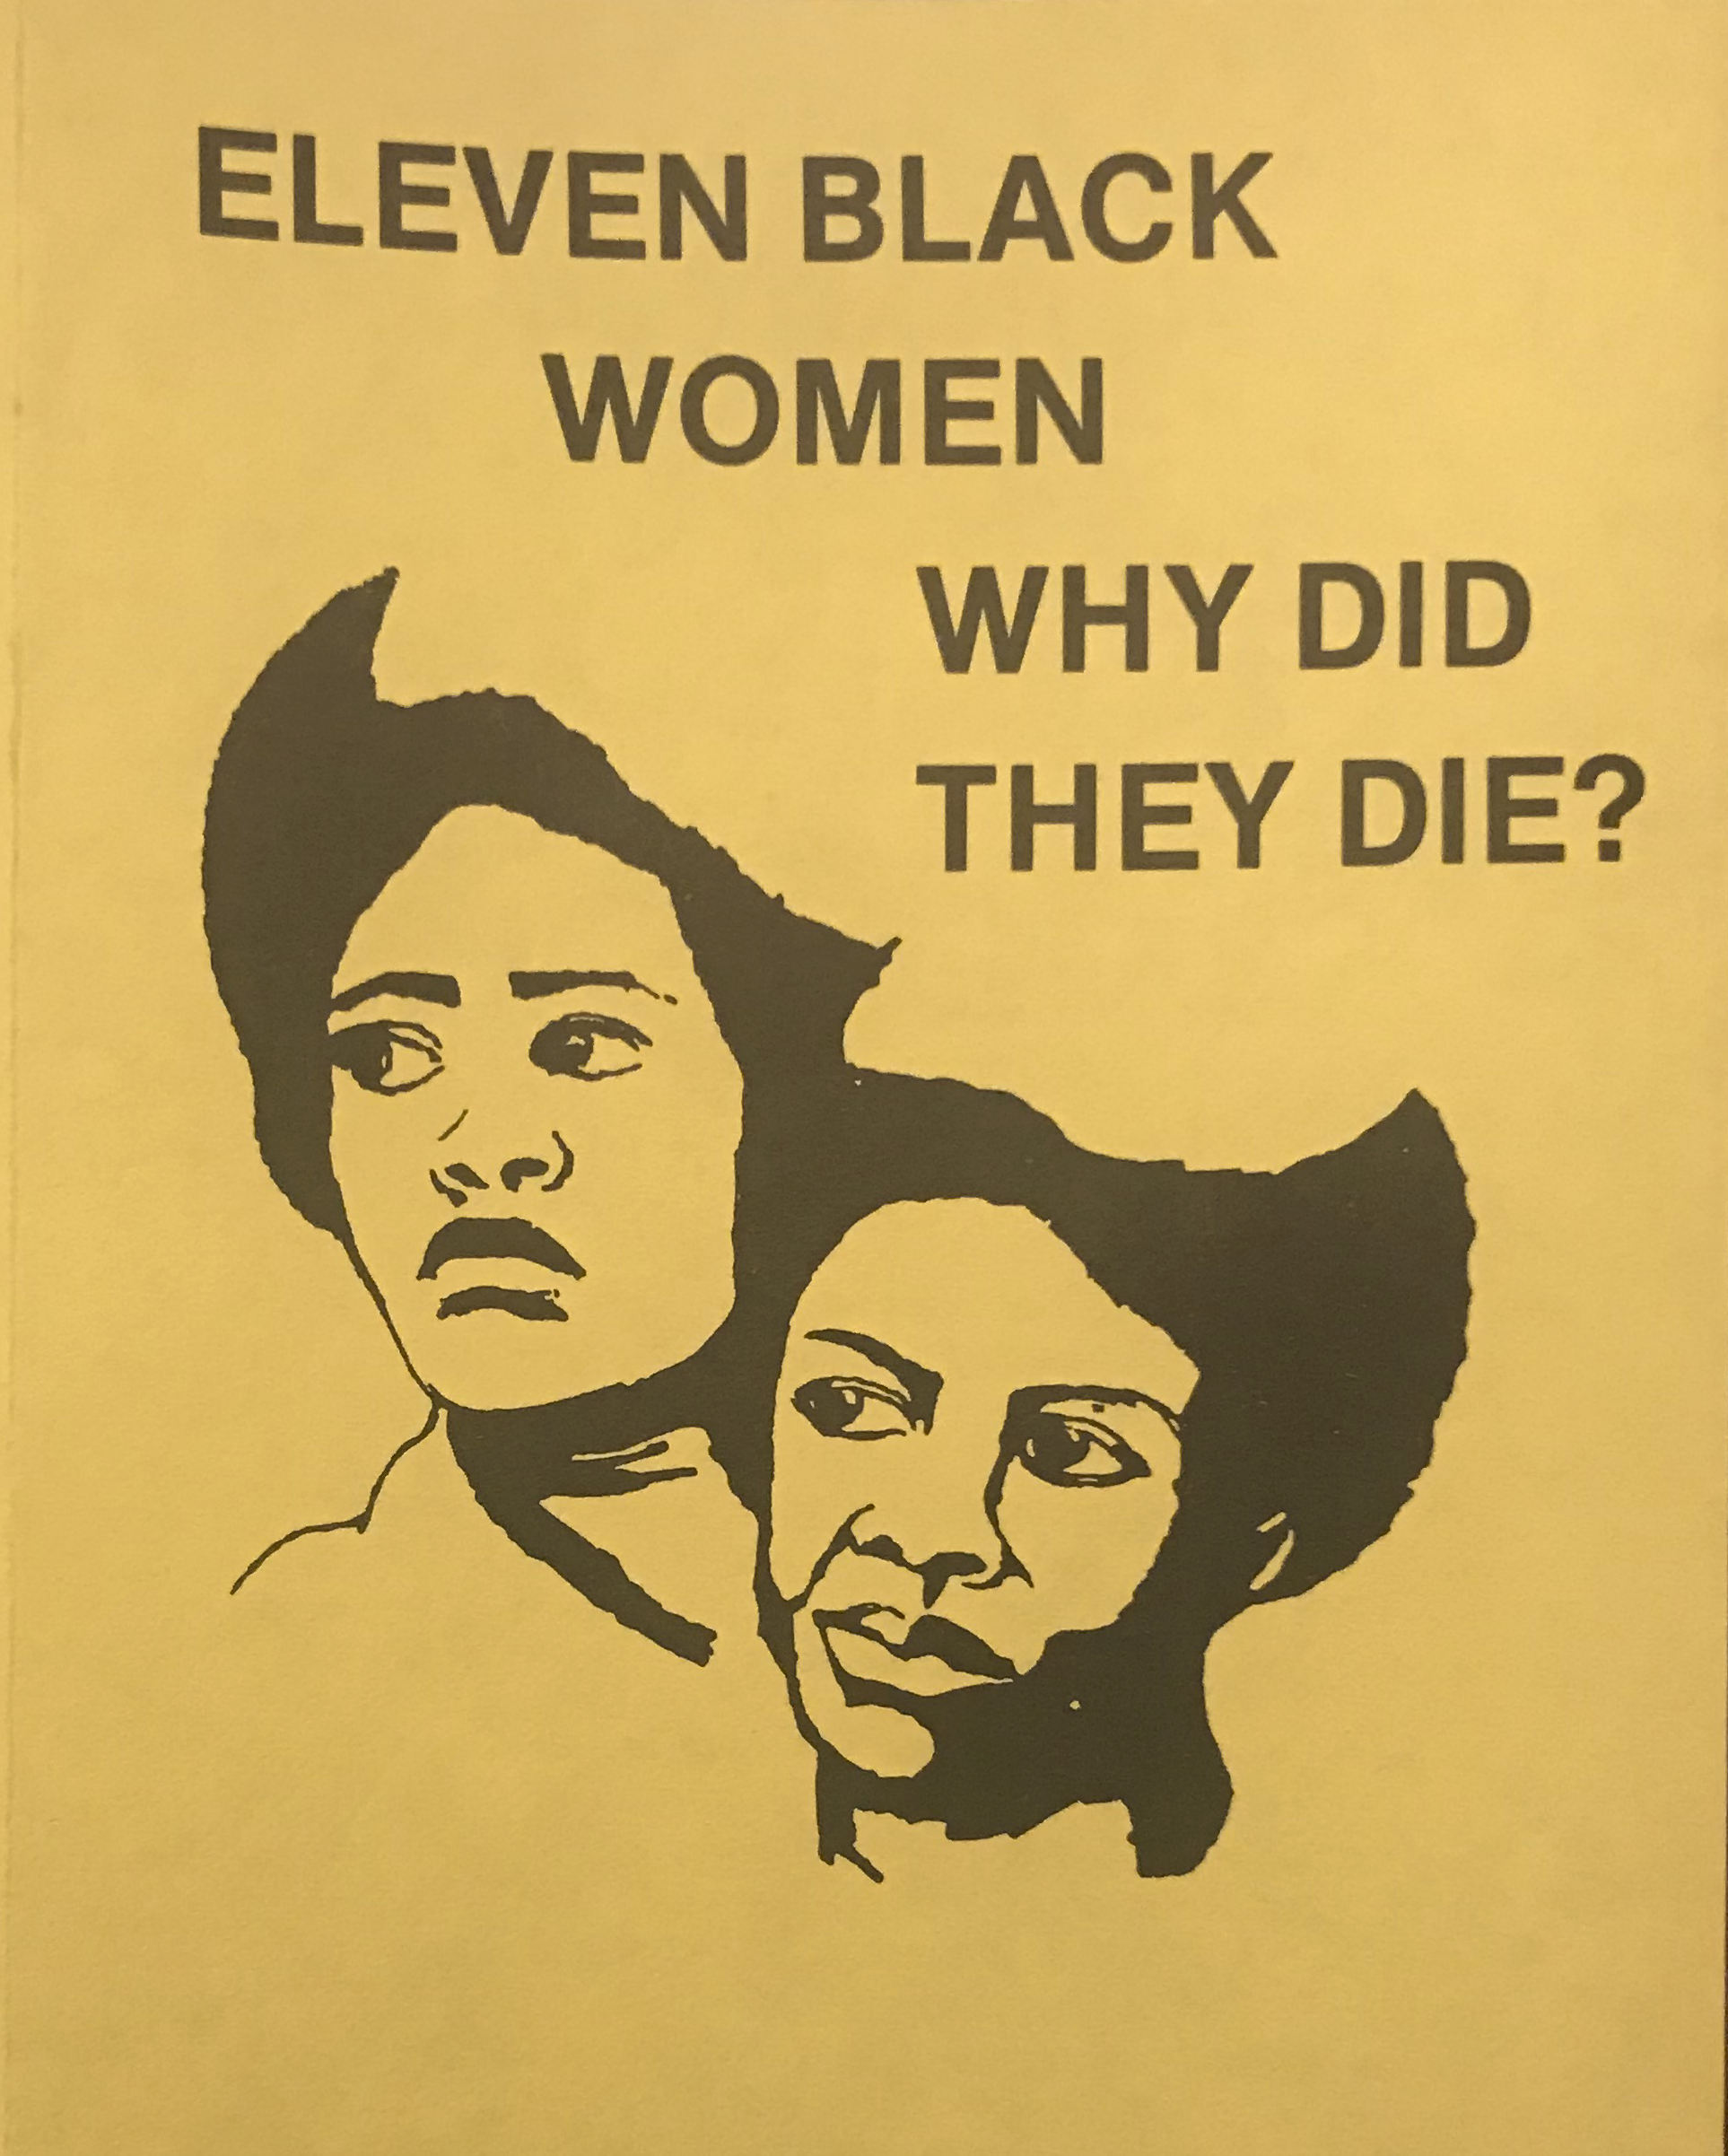 A Combahee River Collective pamphlet from 1979. Courtesy of The History Project